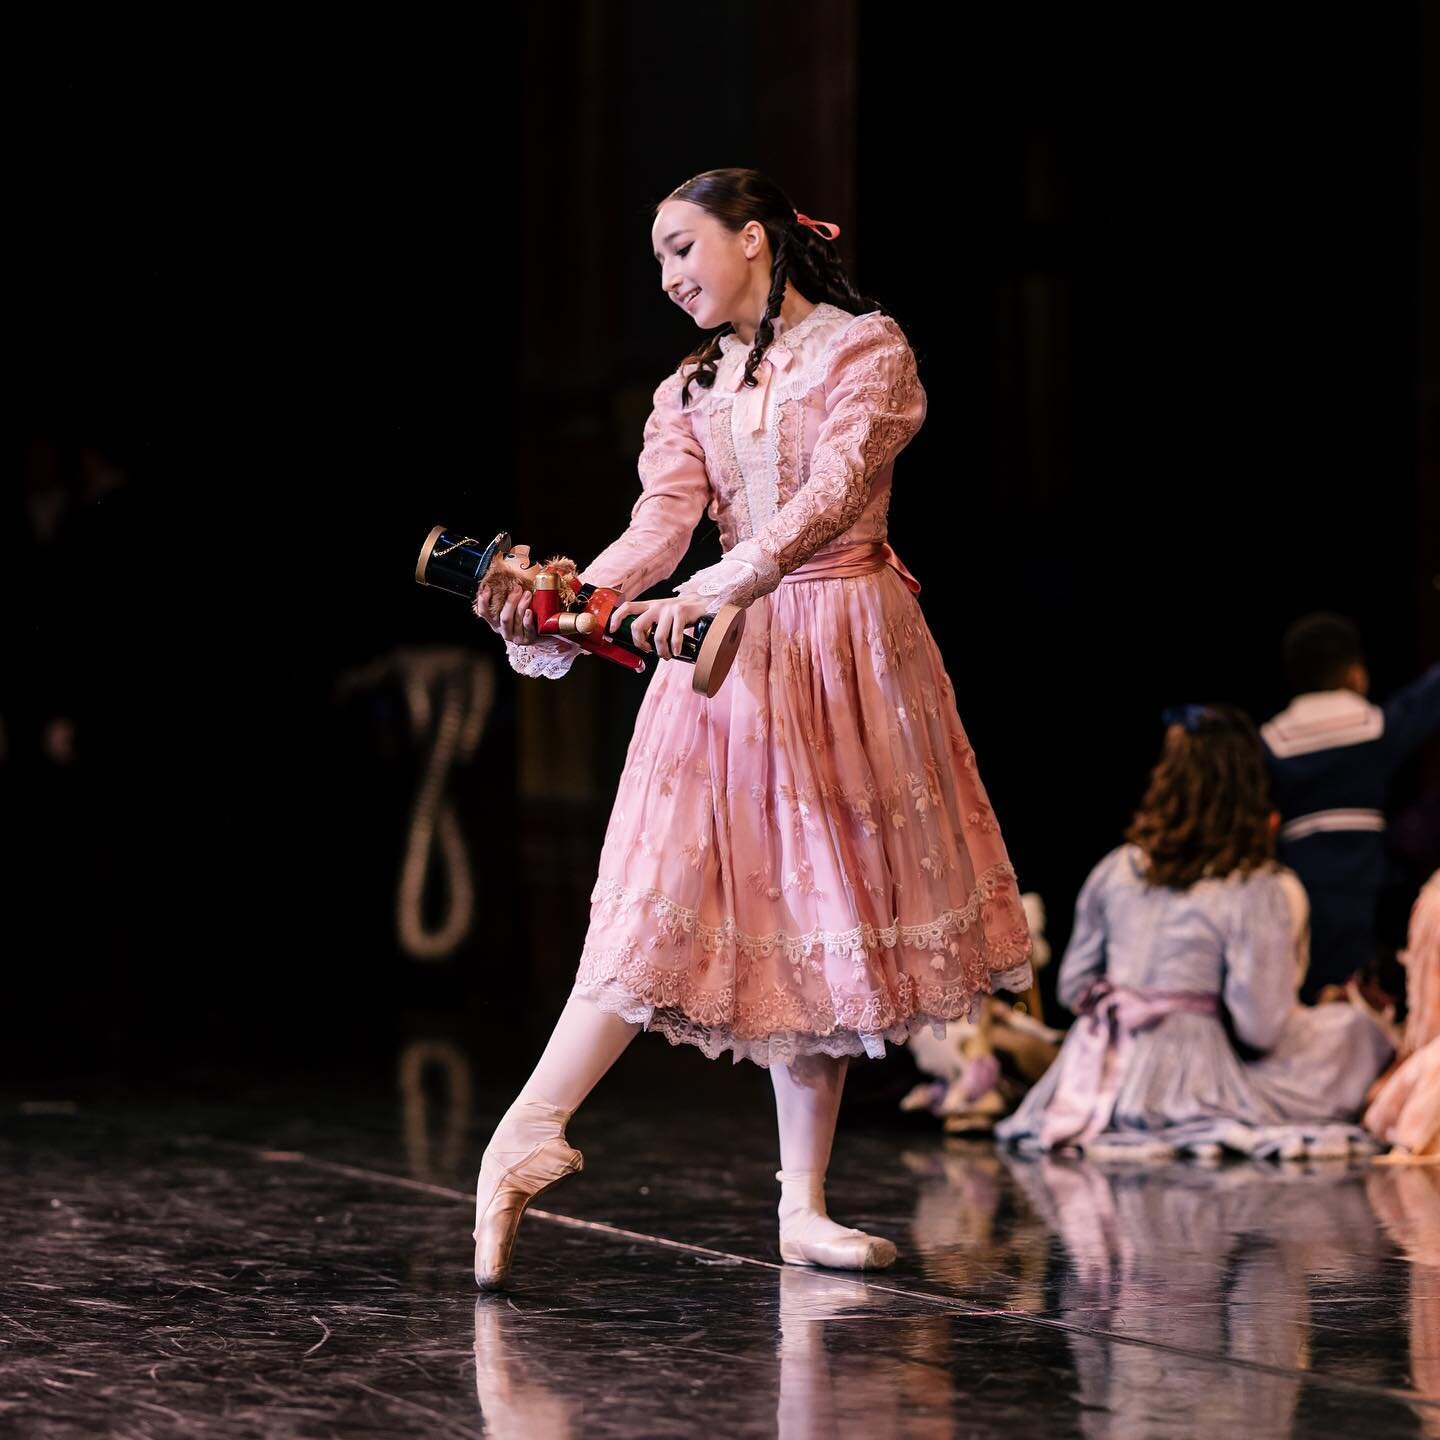 As we head into the last weekend of summer, we want to highlight the amazing accomplishments of some of our graduating and advanced students!

Amandine Isidro - &ldquo;Reflecting on the last few years of my ballet training, I believe that people cros